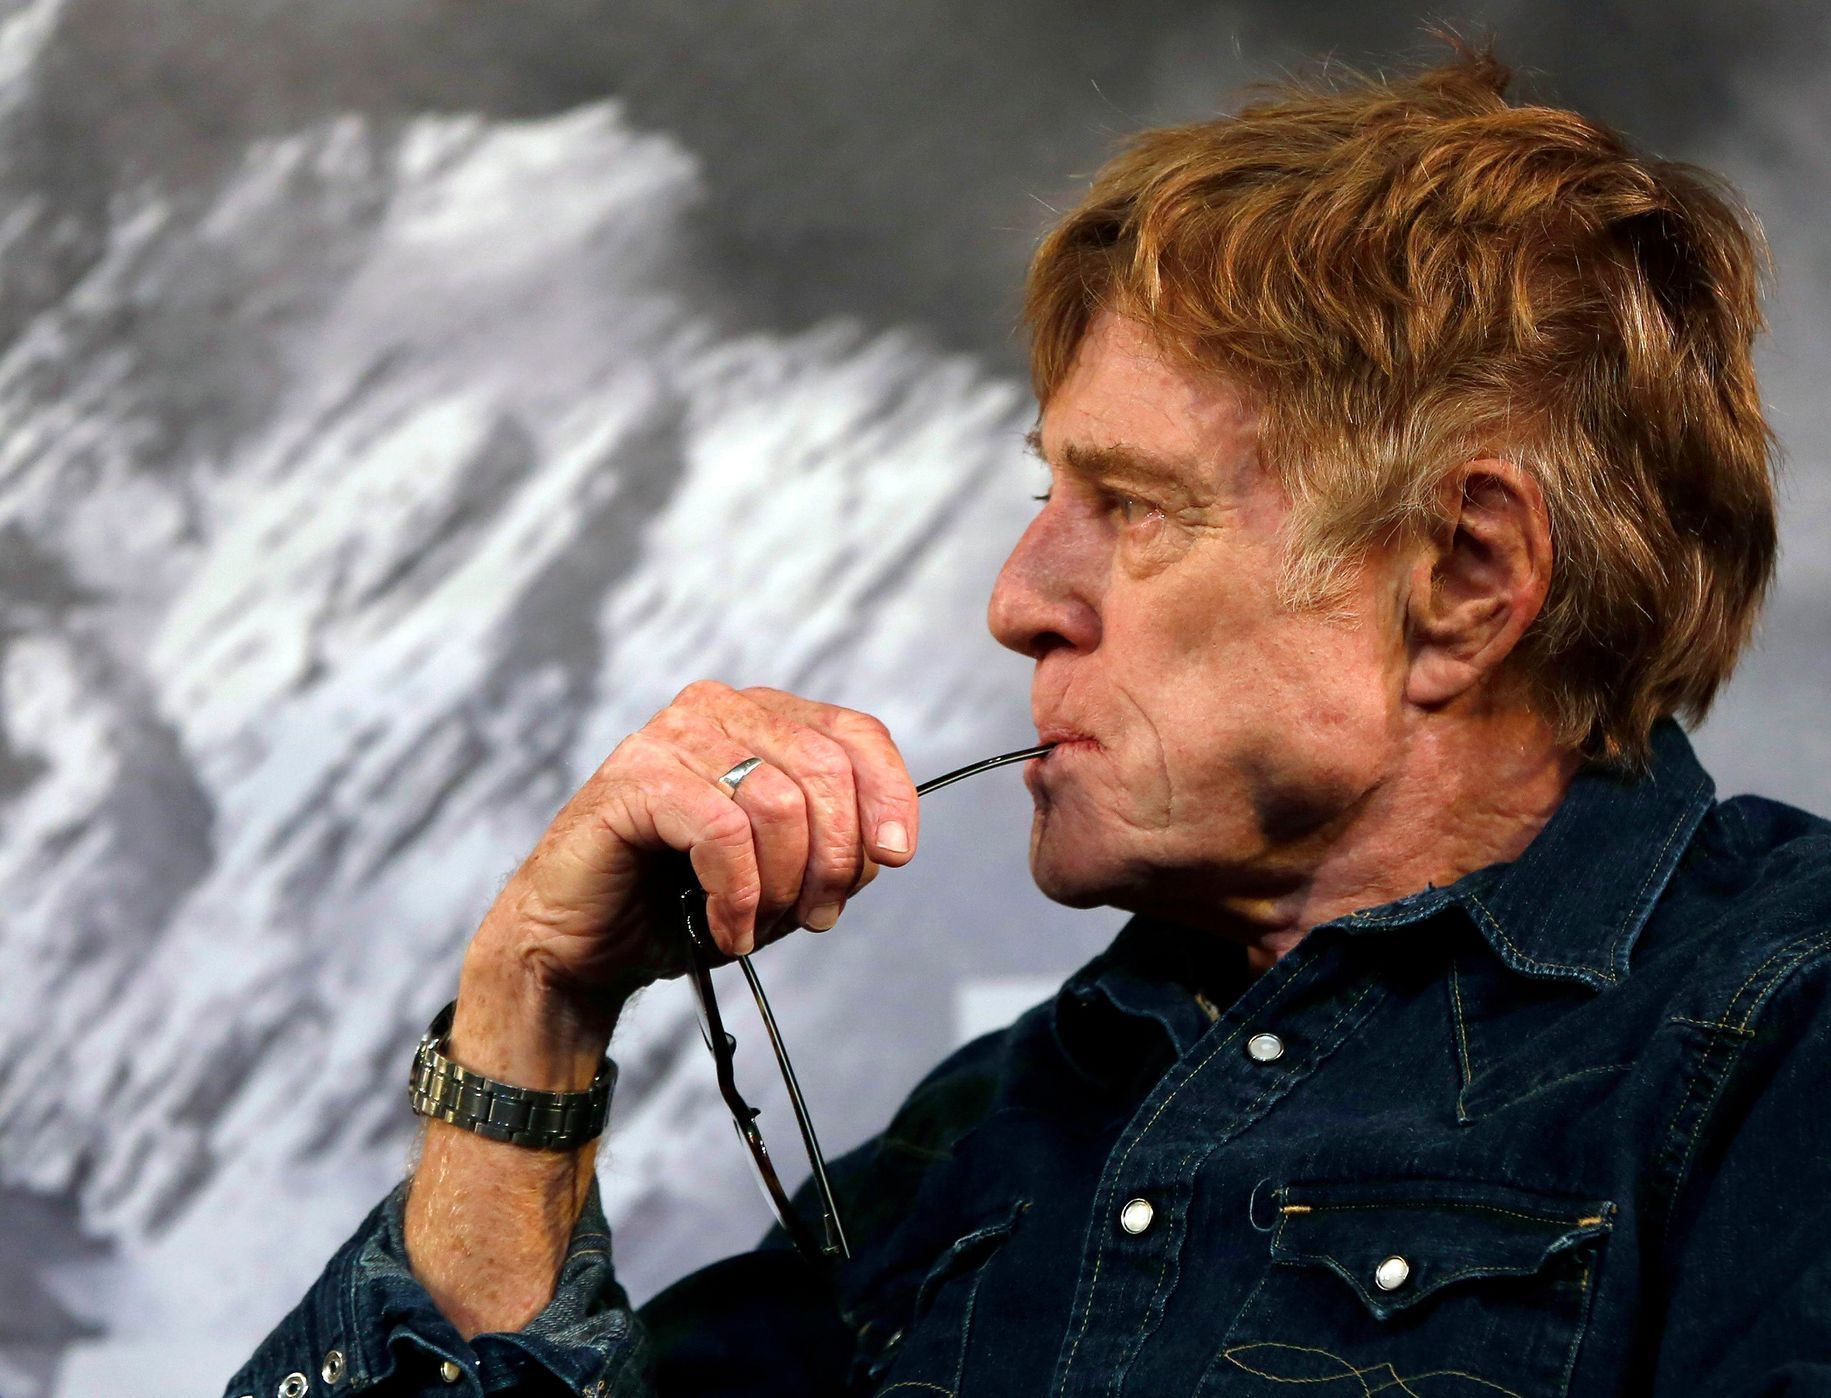 Robert Redford addresses the media at an opening day news conference for the Sundance Film Festival in Park City, Utah